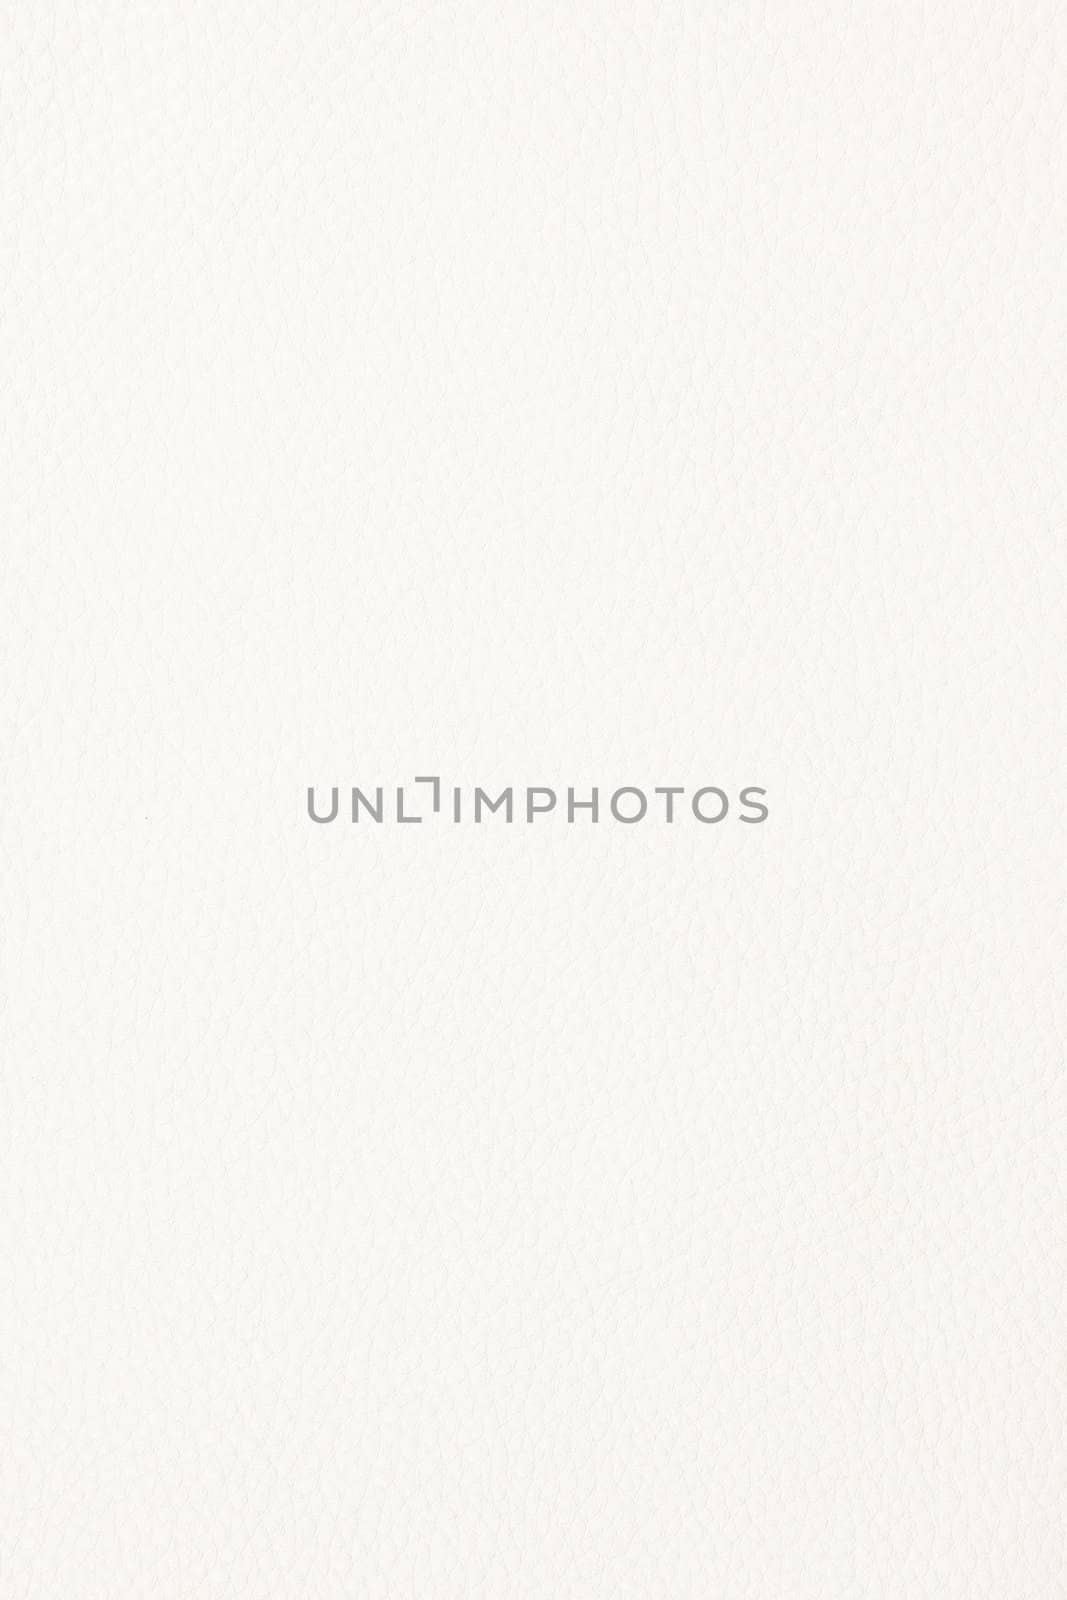 An image of a white leather background